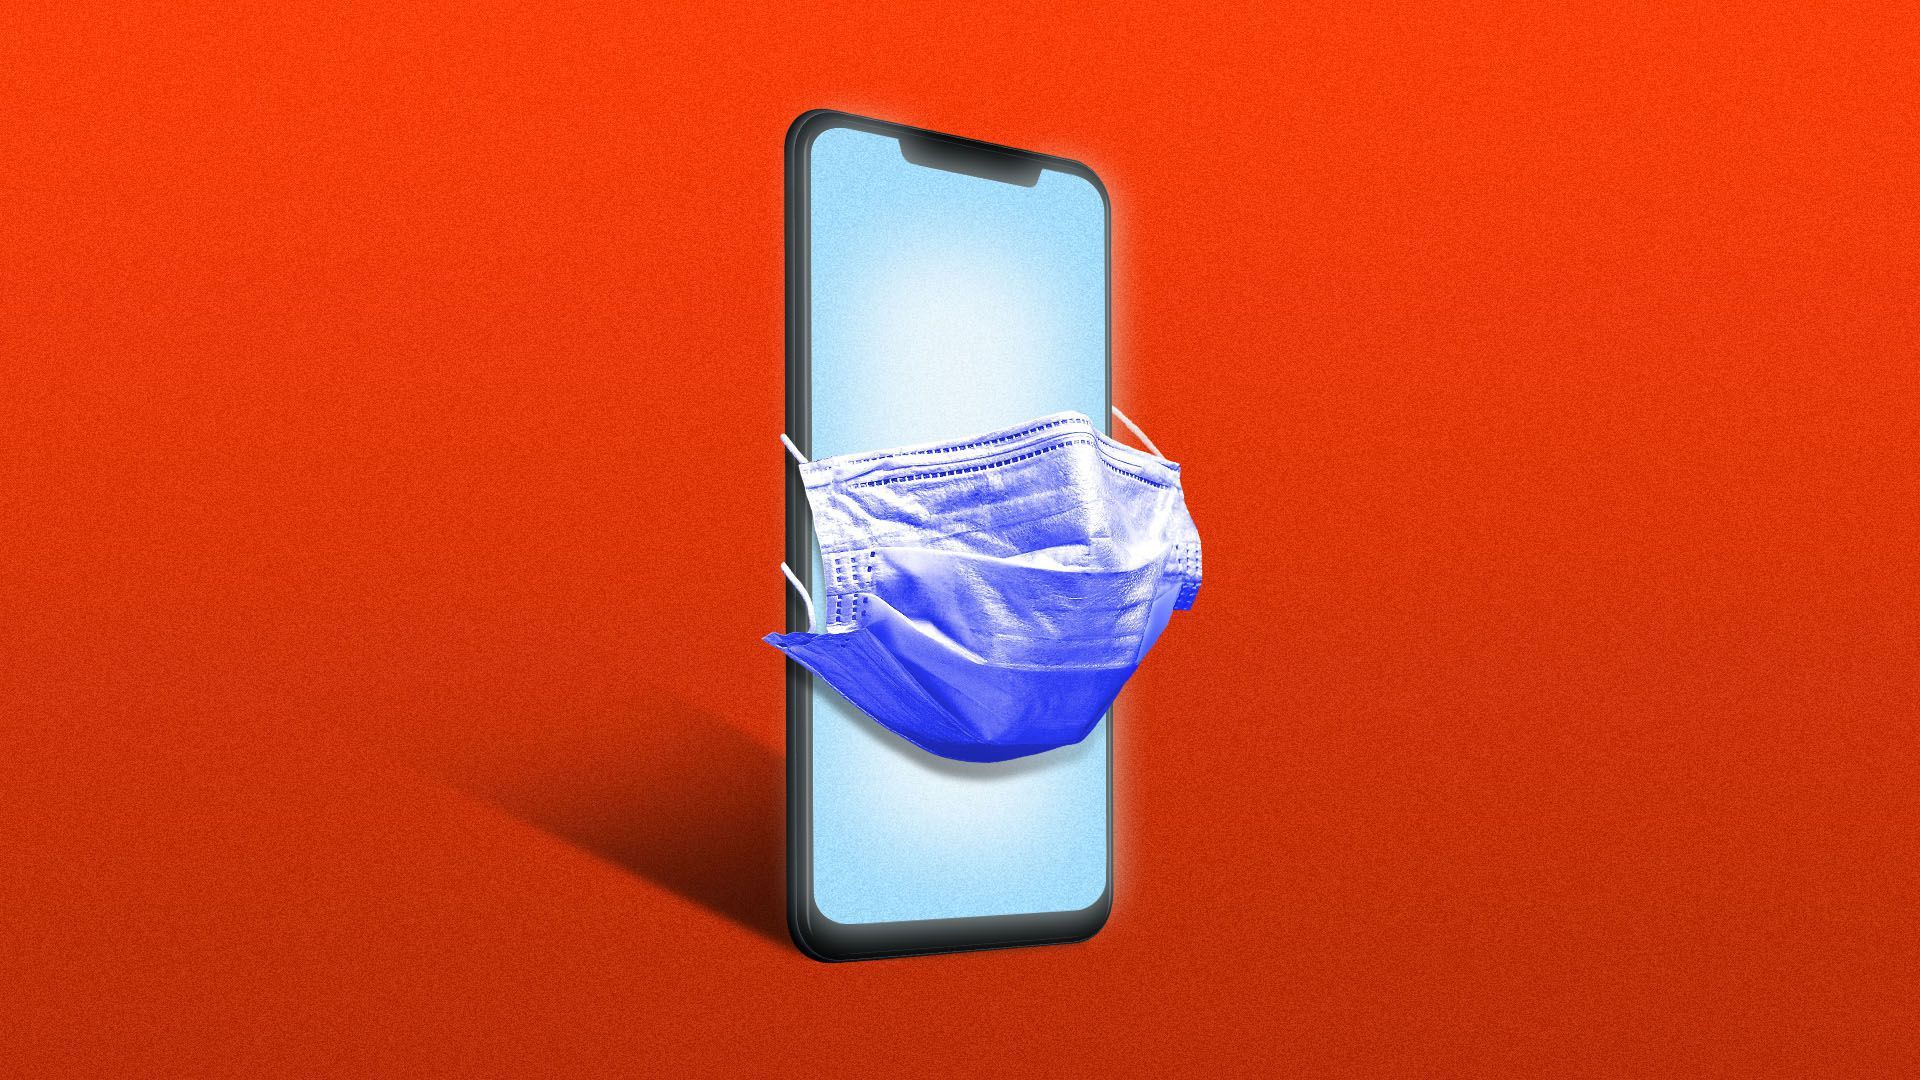 Illustration of a smartphone with a face mask.